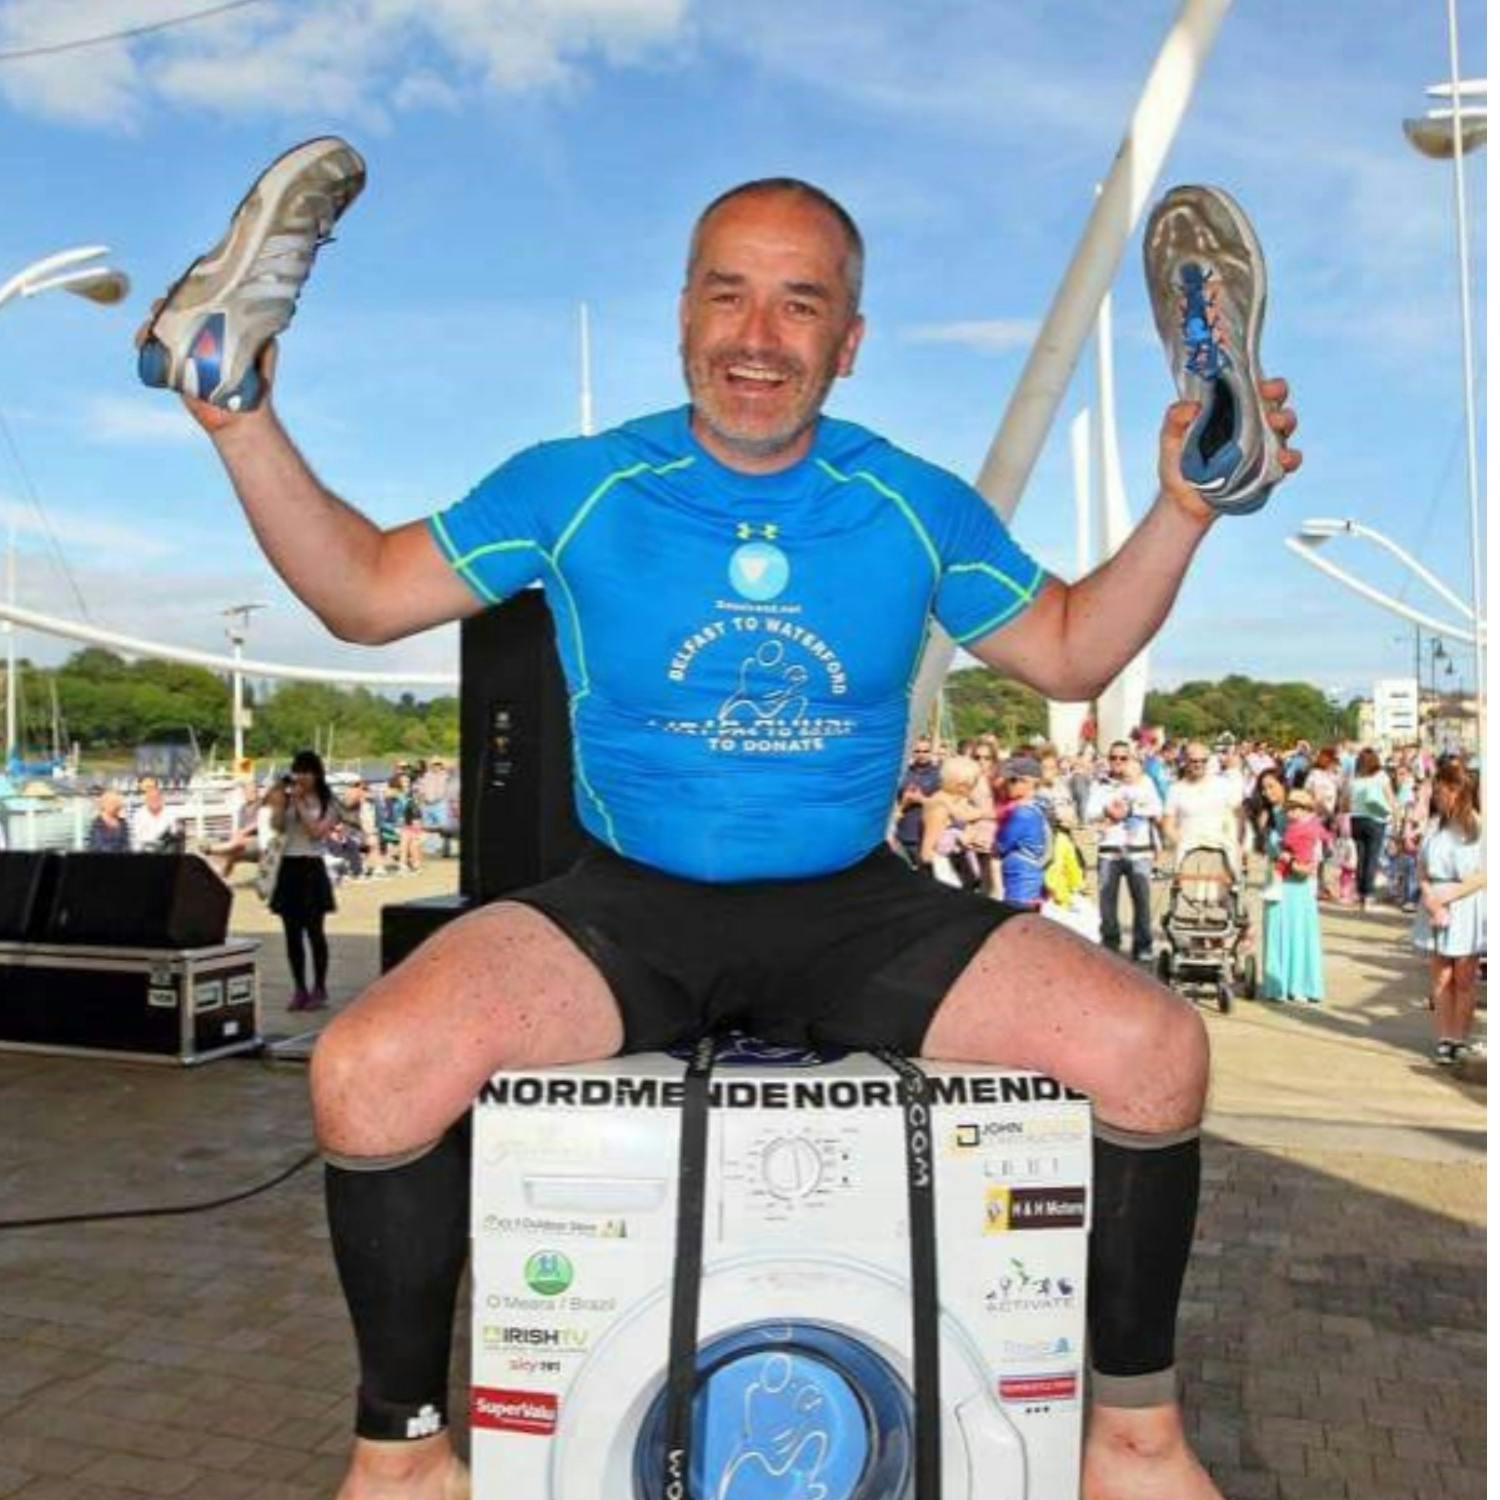 Meet The Waterford Man Who Climbed Kilimanjaro While Carrying A Washing Machine